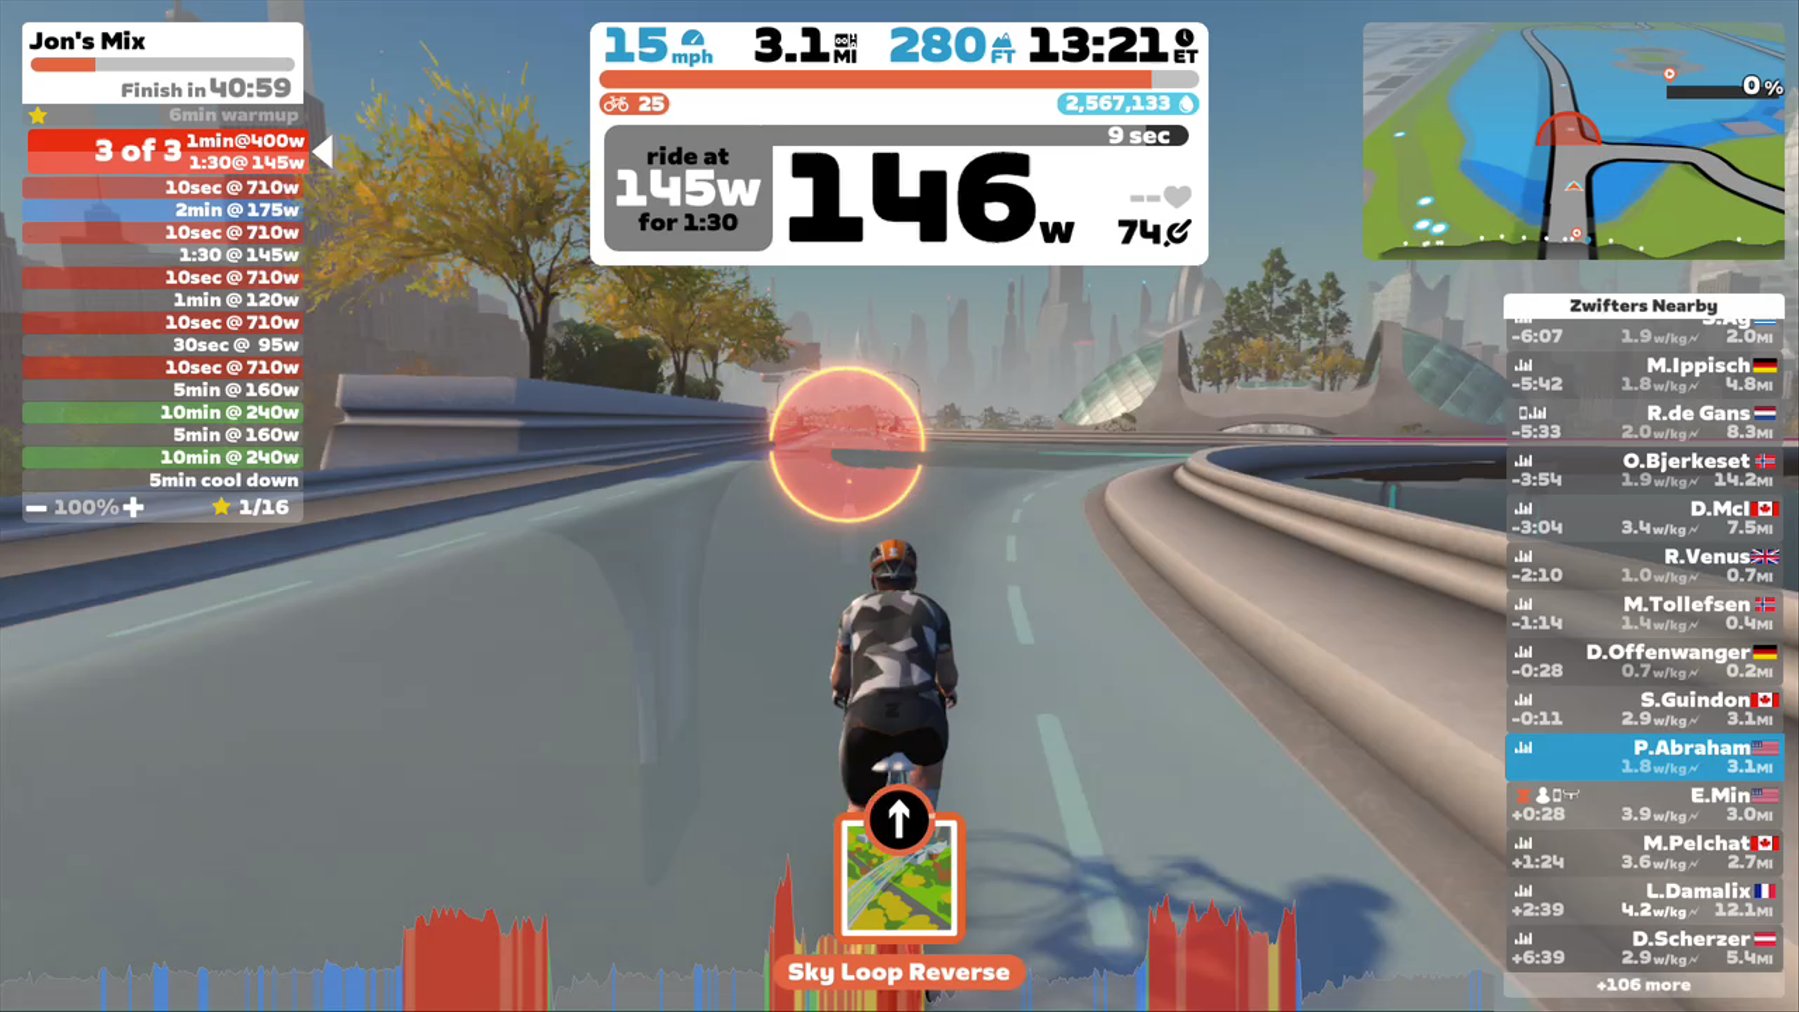 Zwift - Jon's Mix on The Big Ring in New York